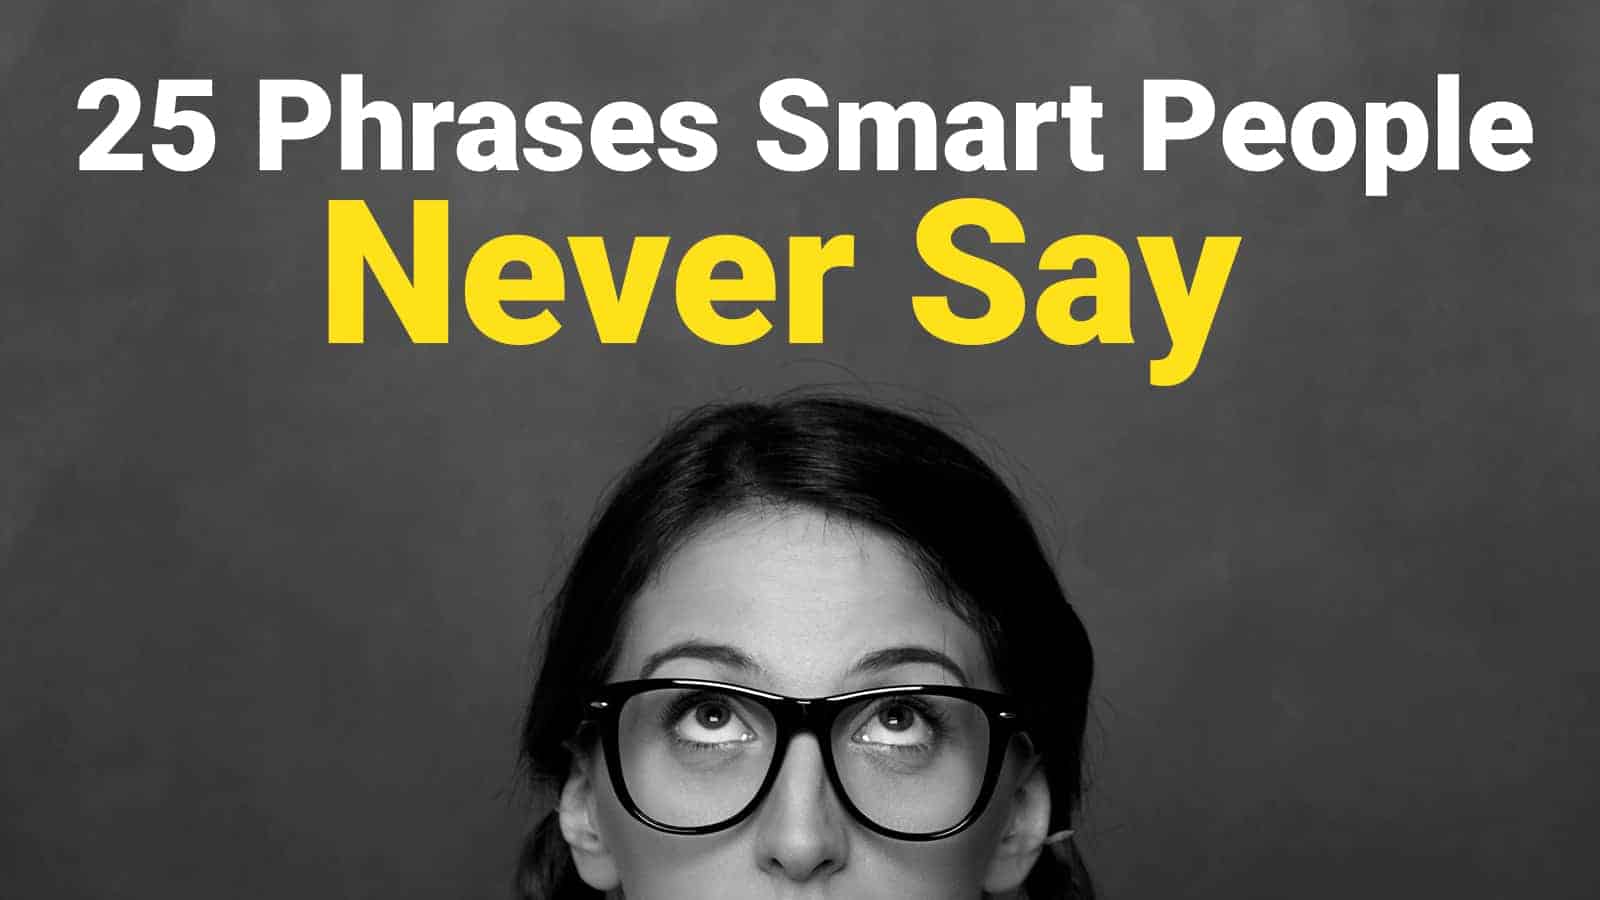 25 Phrases Smart People Never Say